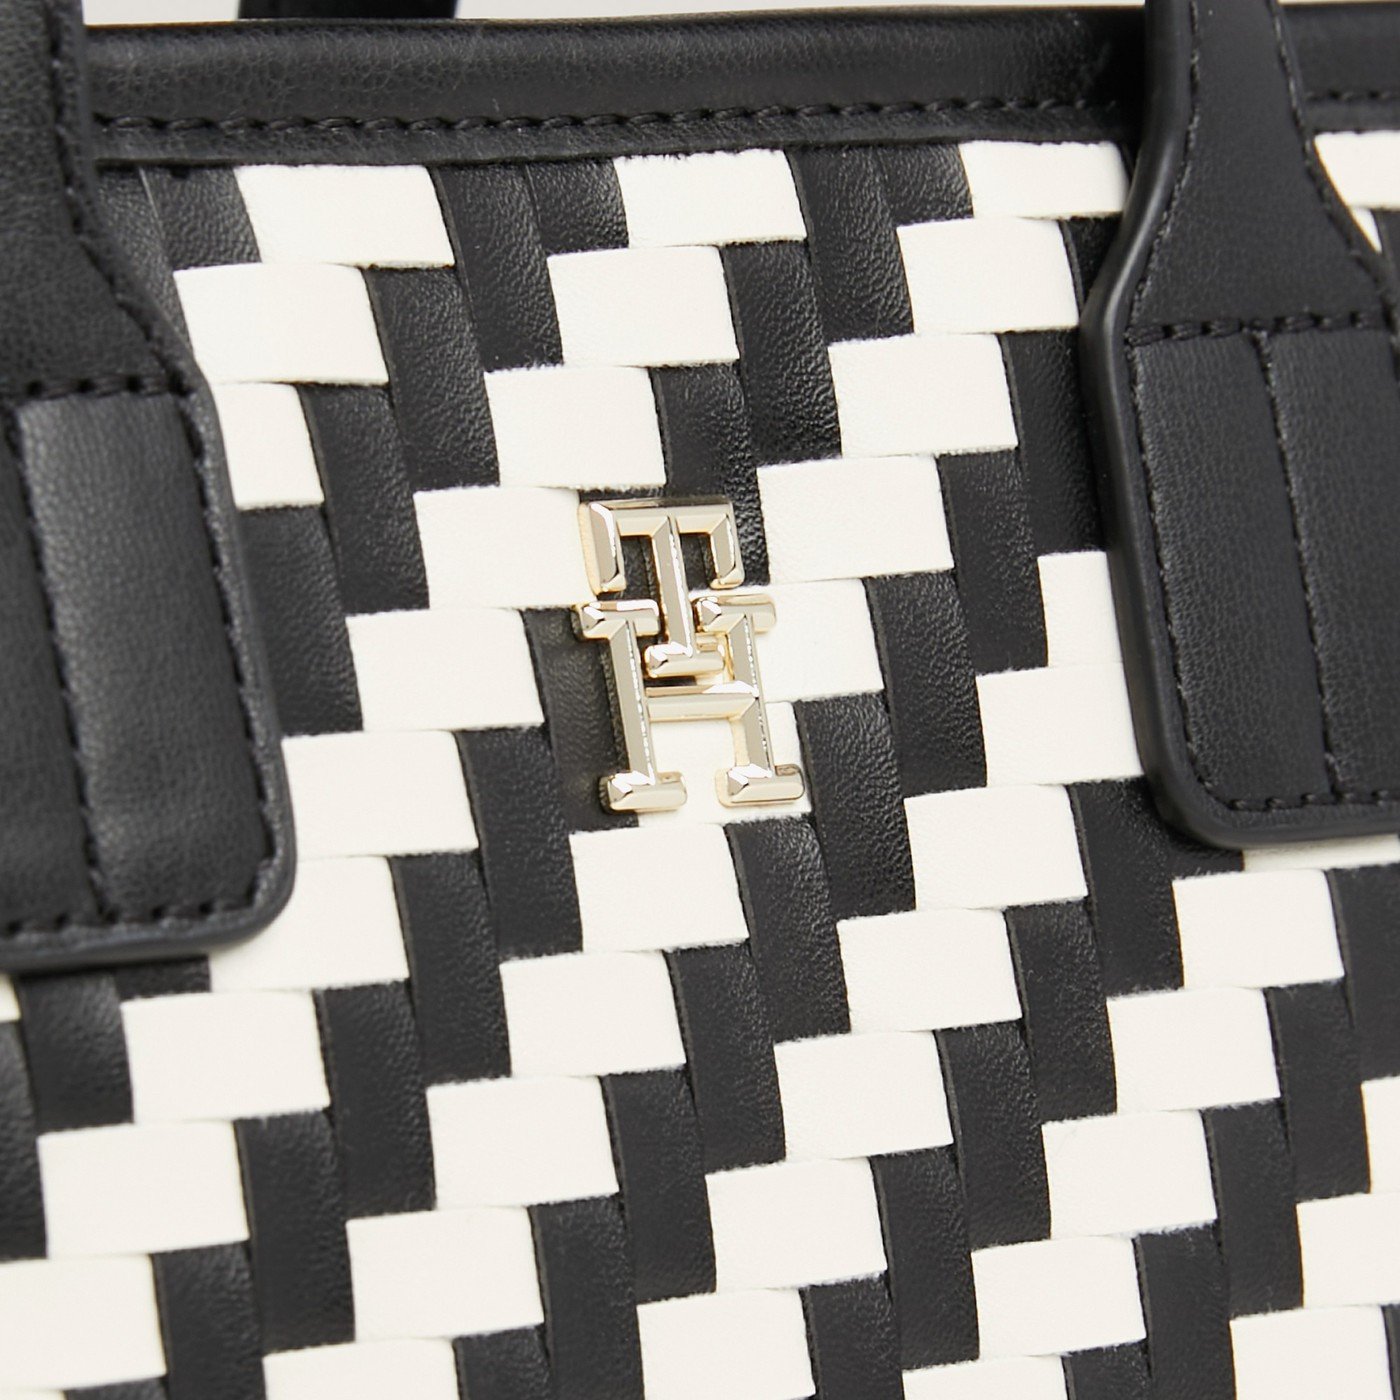 product_detail_image